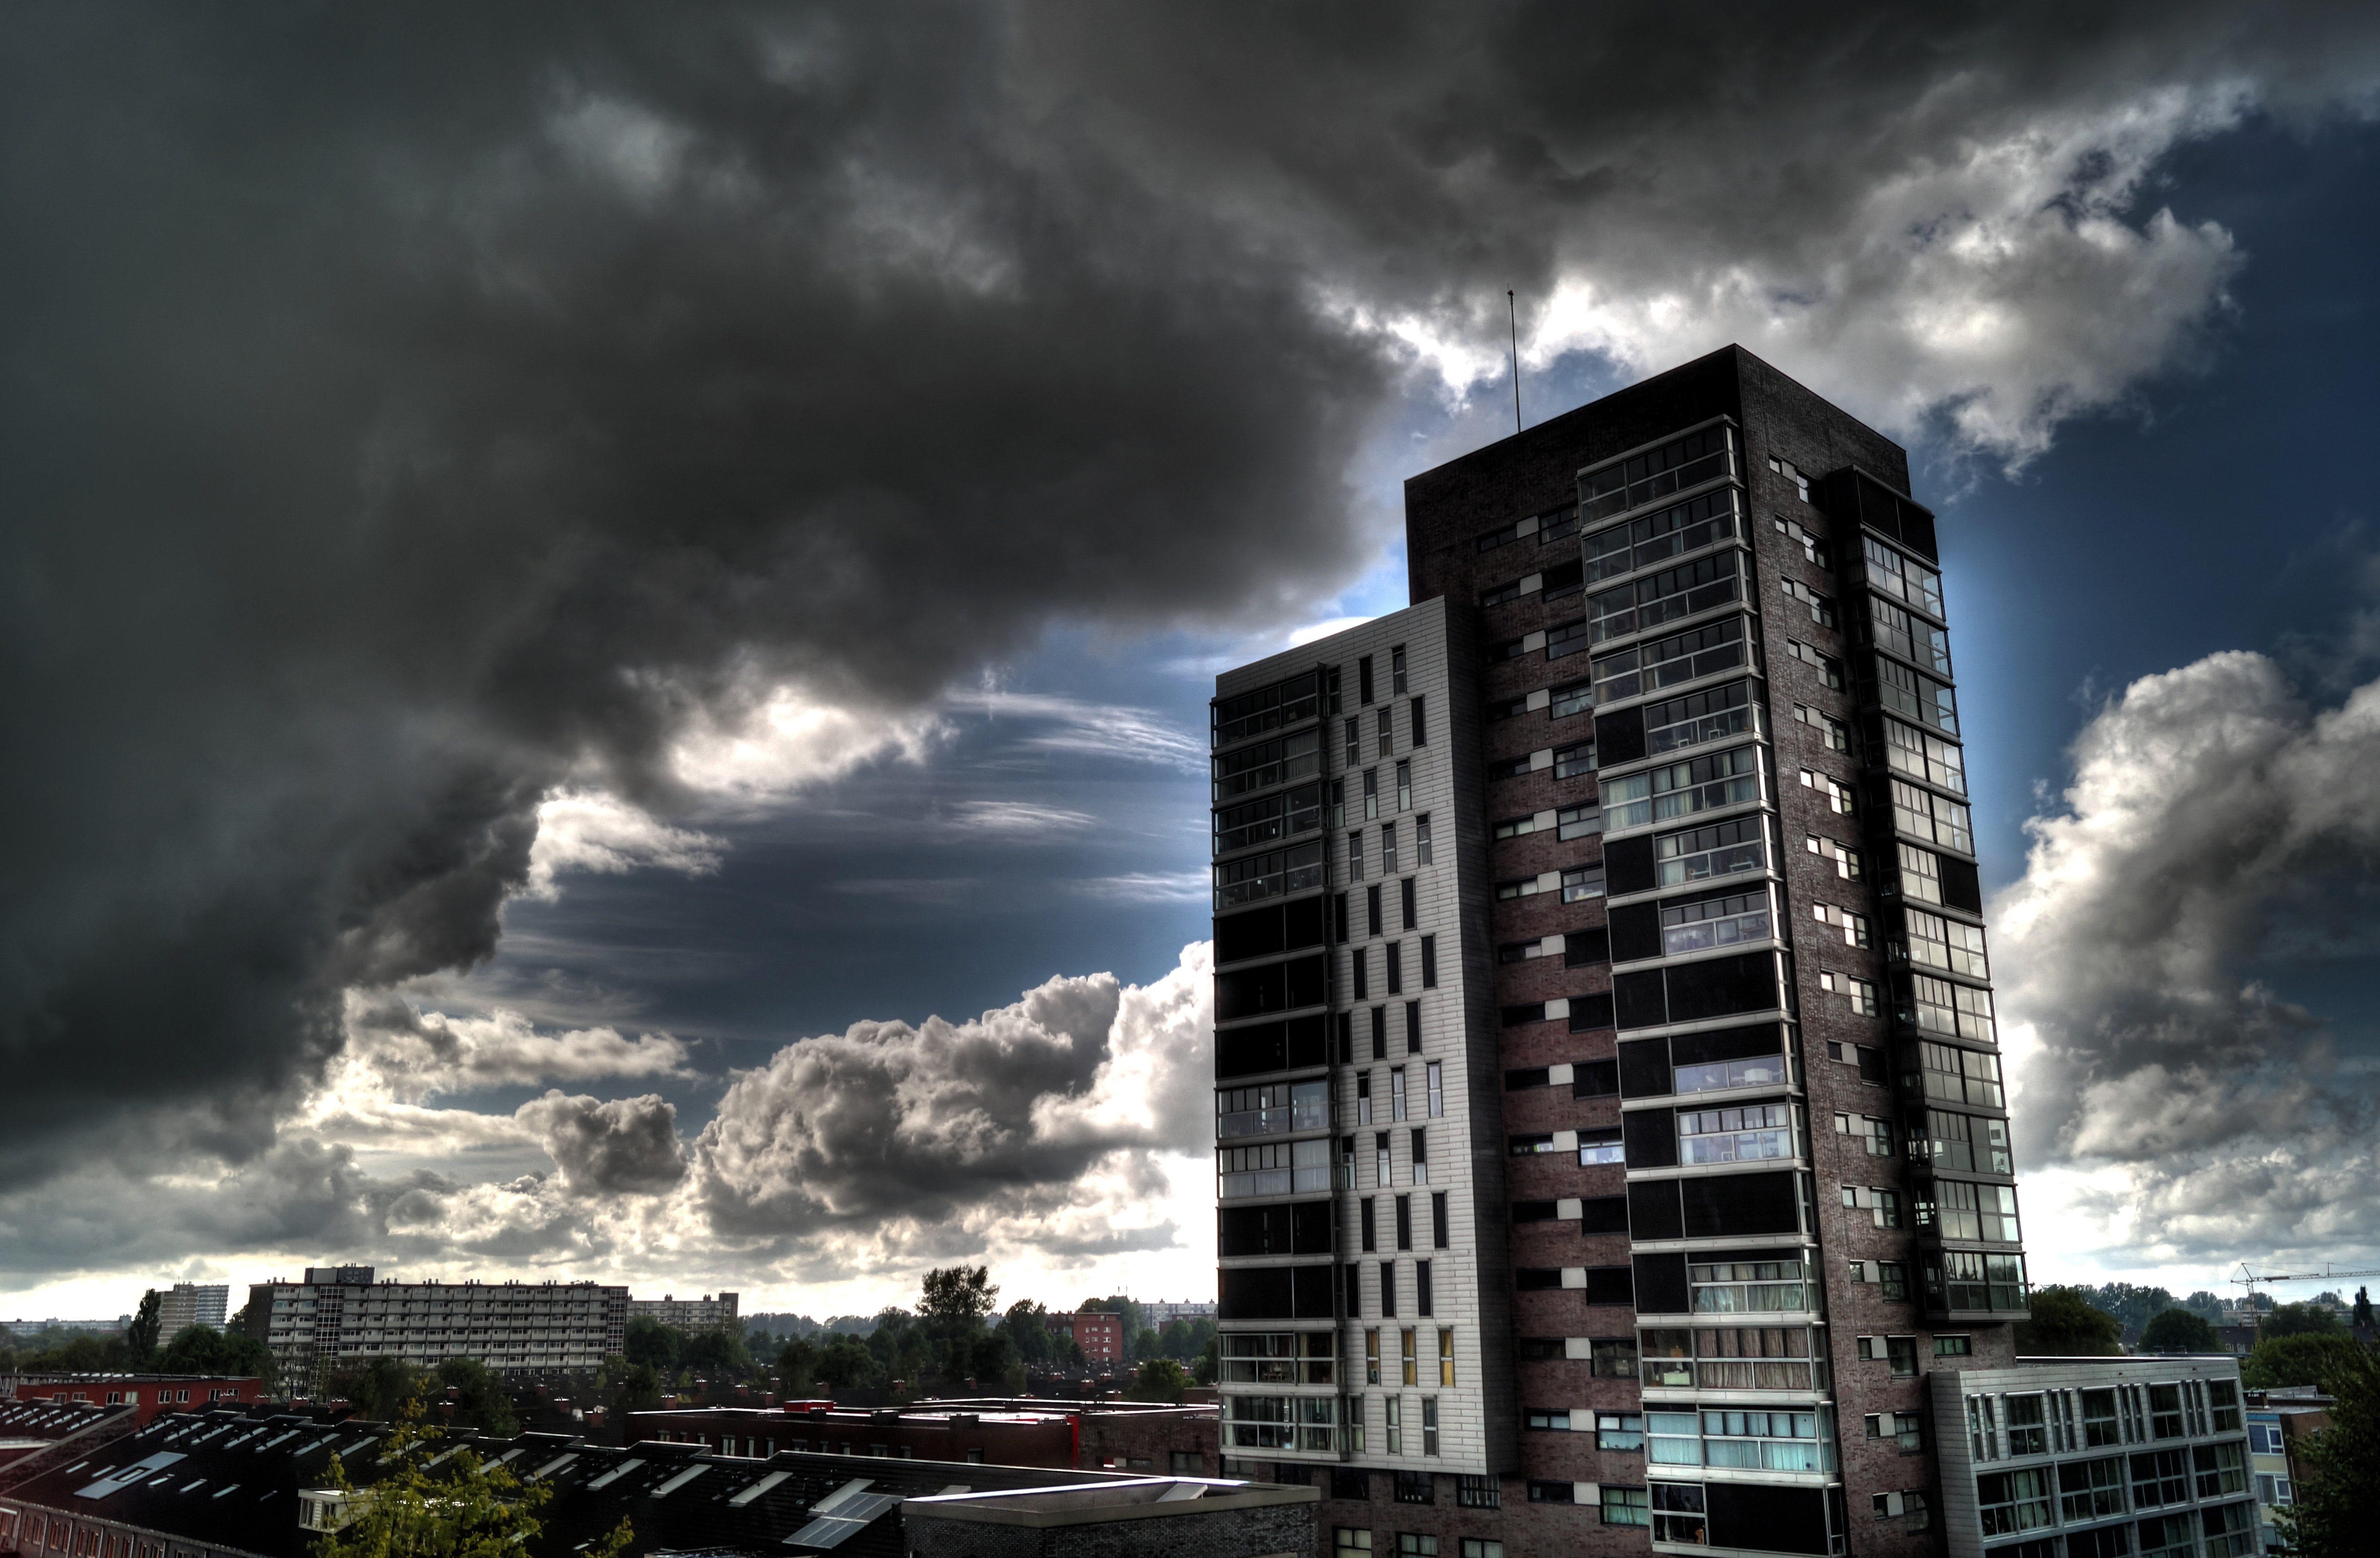 Free stock photo of building, groningen, hdr